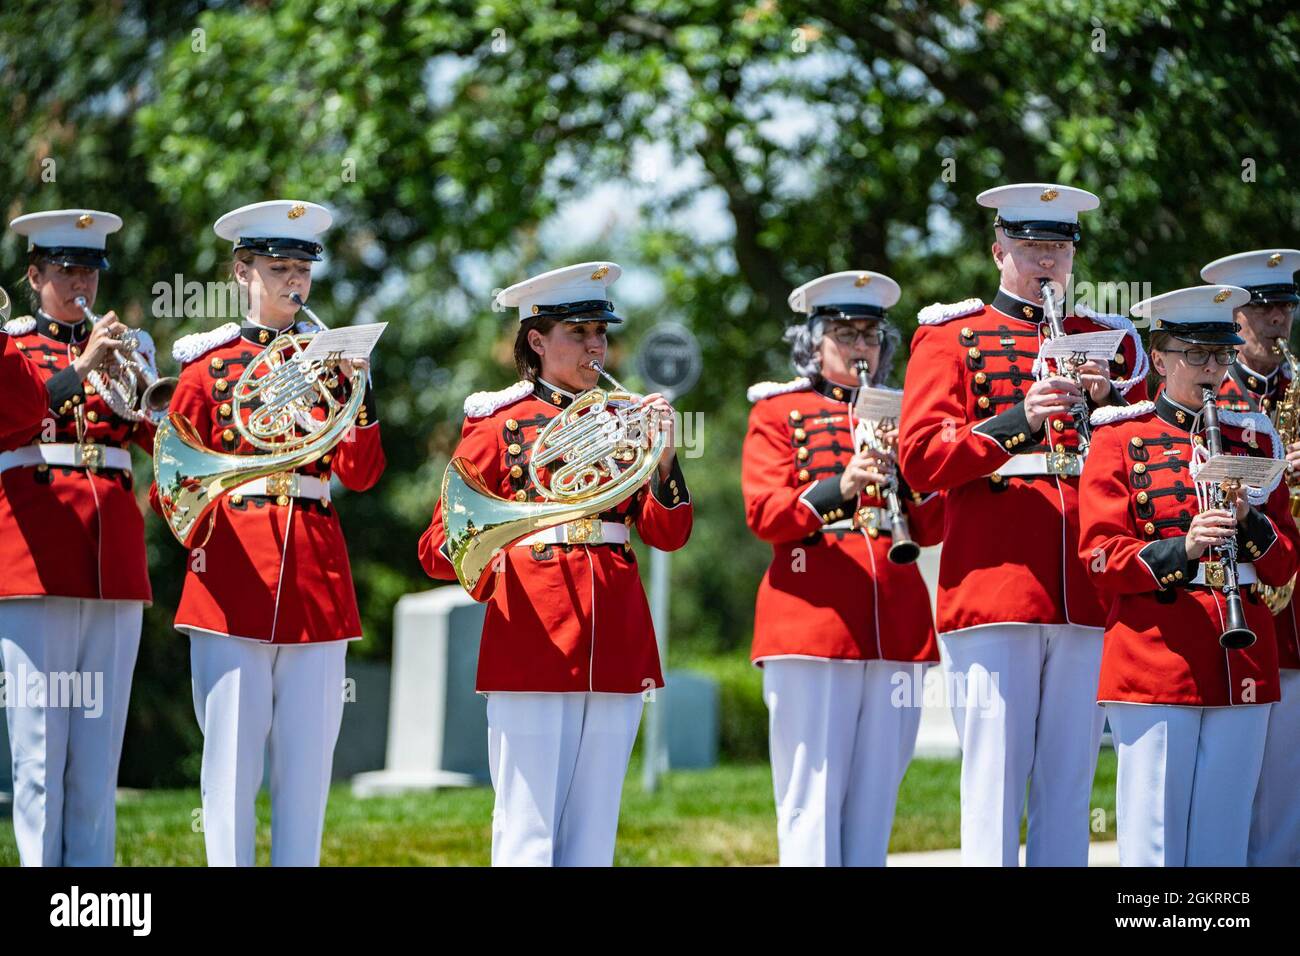 Marines from the “The President’s Own” Marine Band  help conduct military funeral honors for U.S. Marine Corps 1st Lt. John Warner in Section 4 of Arlington National Cemetery, Arlington, Virginia, June 23, 2021.    Former Senator for Virginia and former Secretary of the Navy, Warner was born on Feb. 18, 1927 in Washington, D.C. He joined the U.S. Navy at age 17 in 1945 and served during the final months of World War II. After graduating from the University of Virginia School of Law, Warner joined the U.S. Marine Corps in 1950 to serve in the Korean War. After his military service and receiving Stock Photo